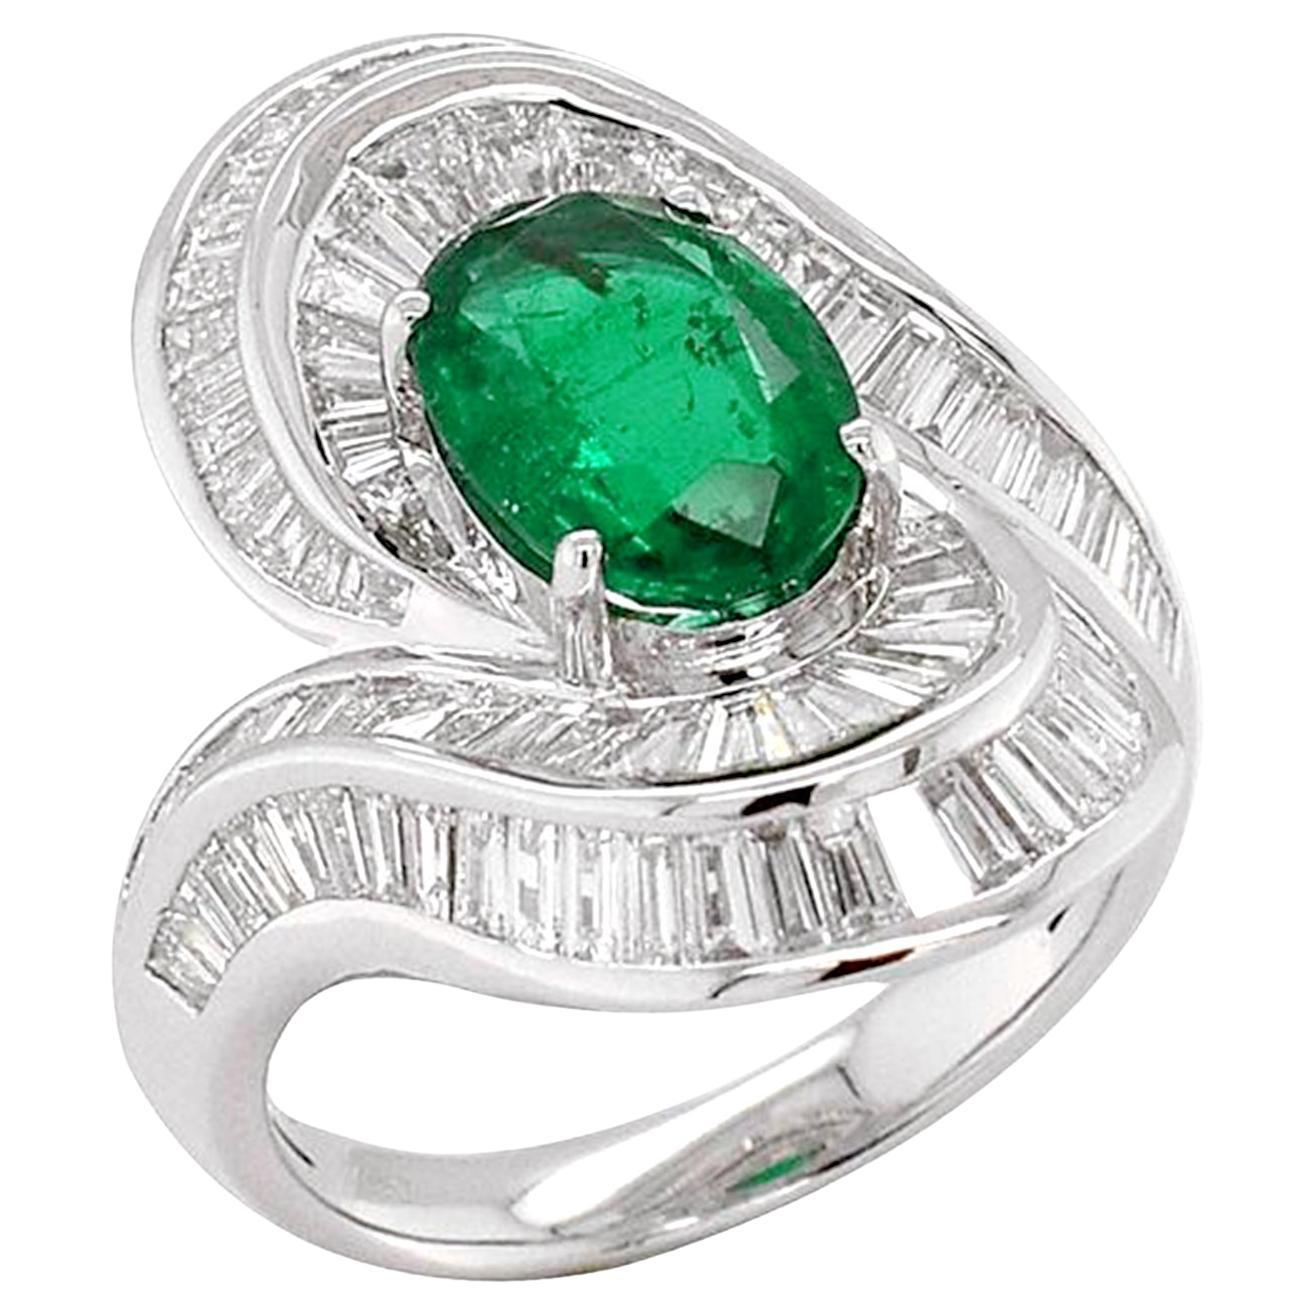 Vintage Style Emerald Ring With Diamonds In 18k White Gold